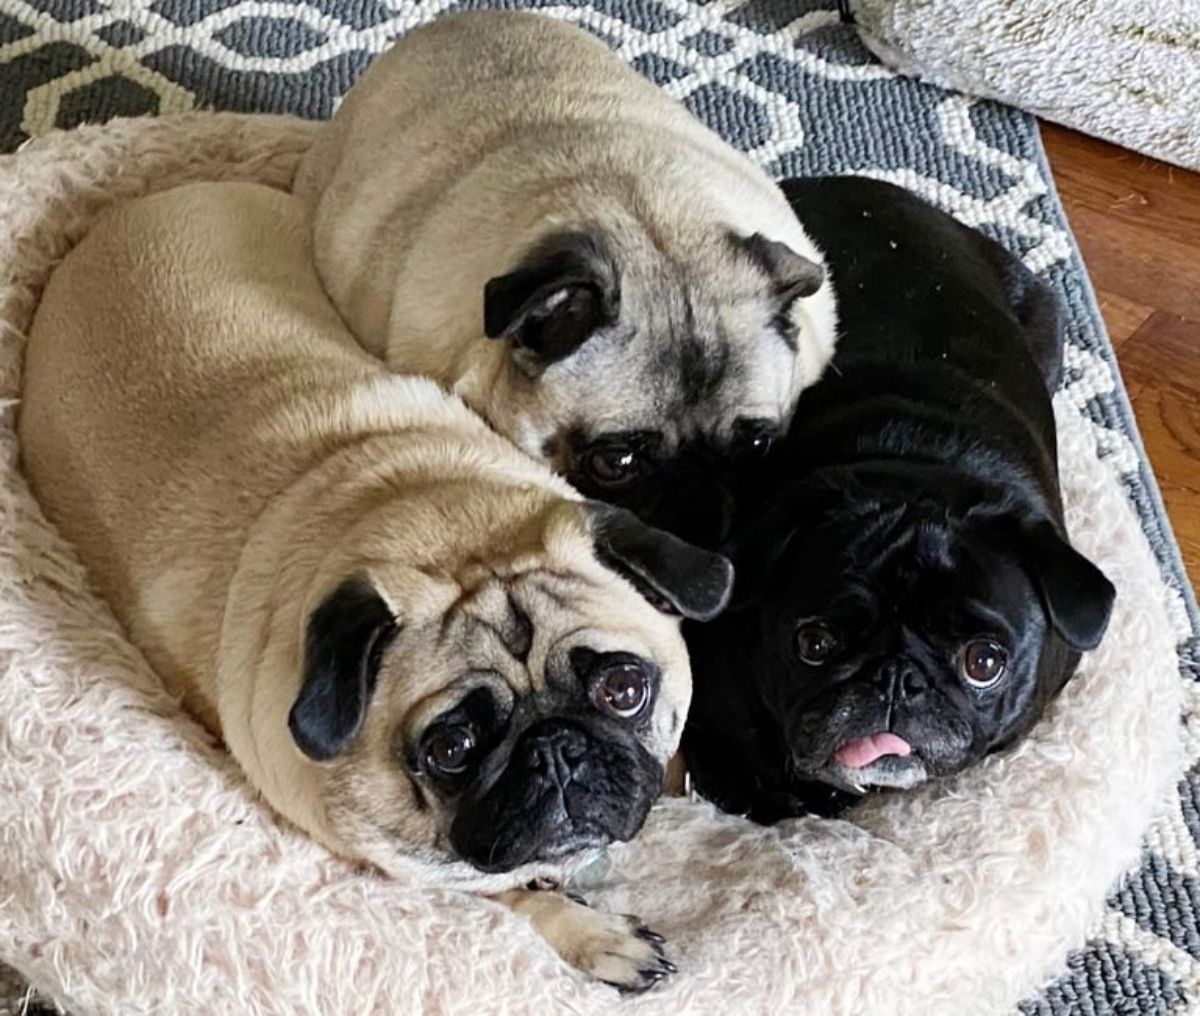 2 brown pugs and 1 black puh all laying together ion a small beige dog bed with 1 brown pug on both dogs